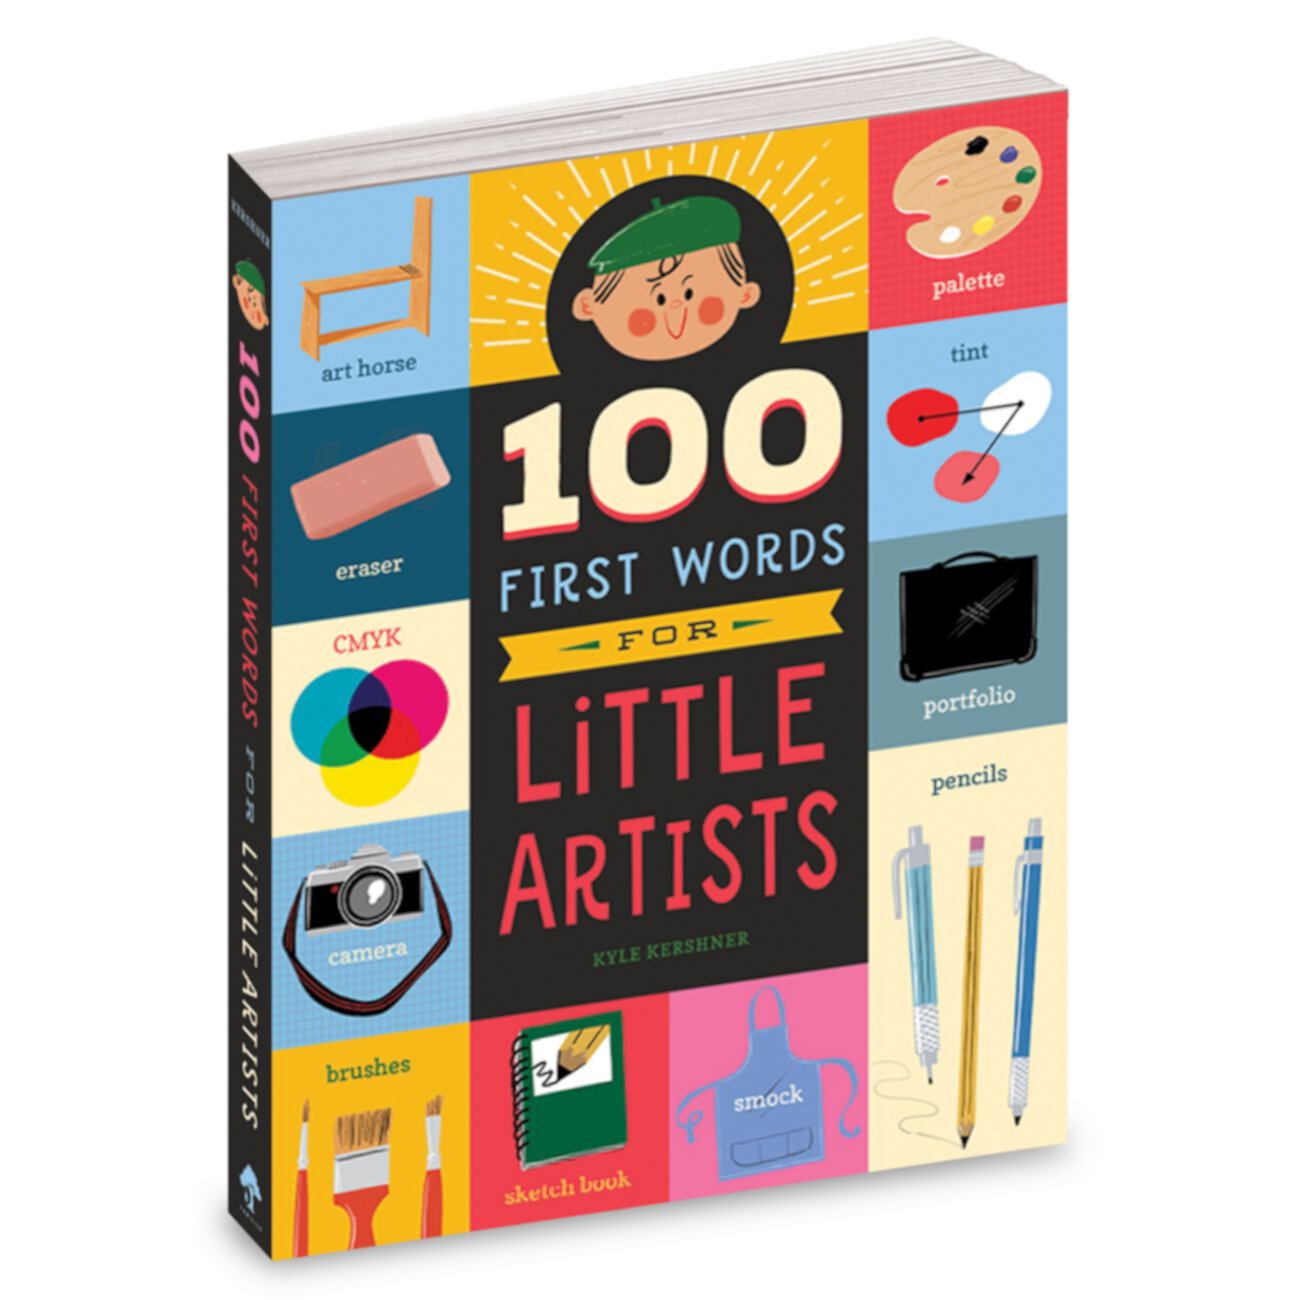 2+ 100 First Words For Little Artists Book Workman Publishing